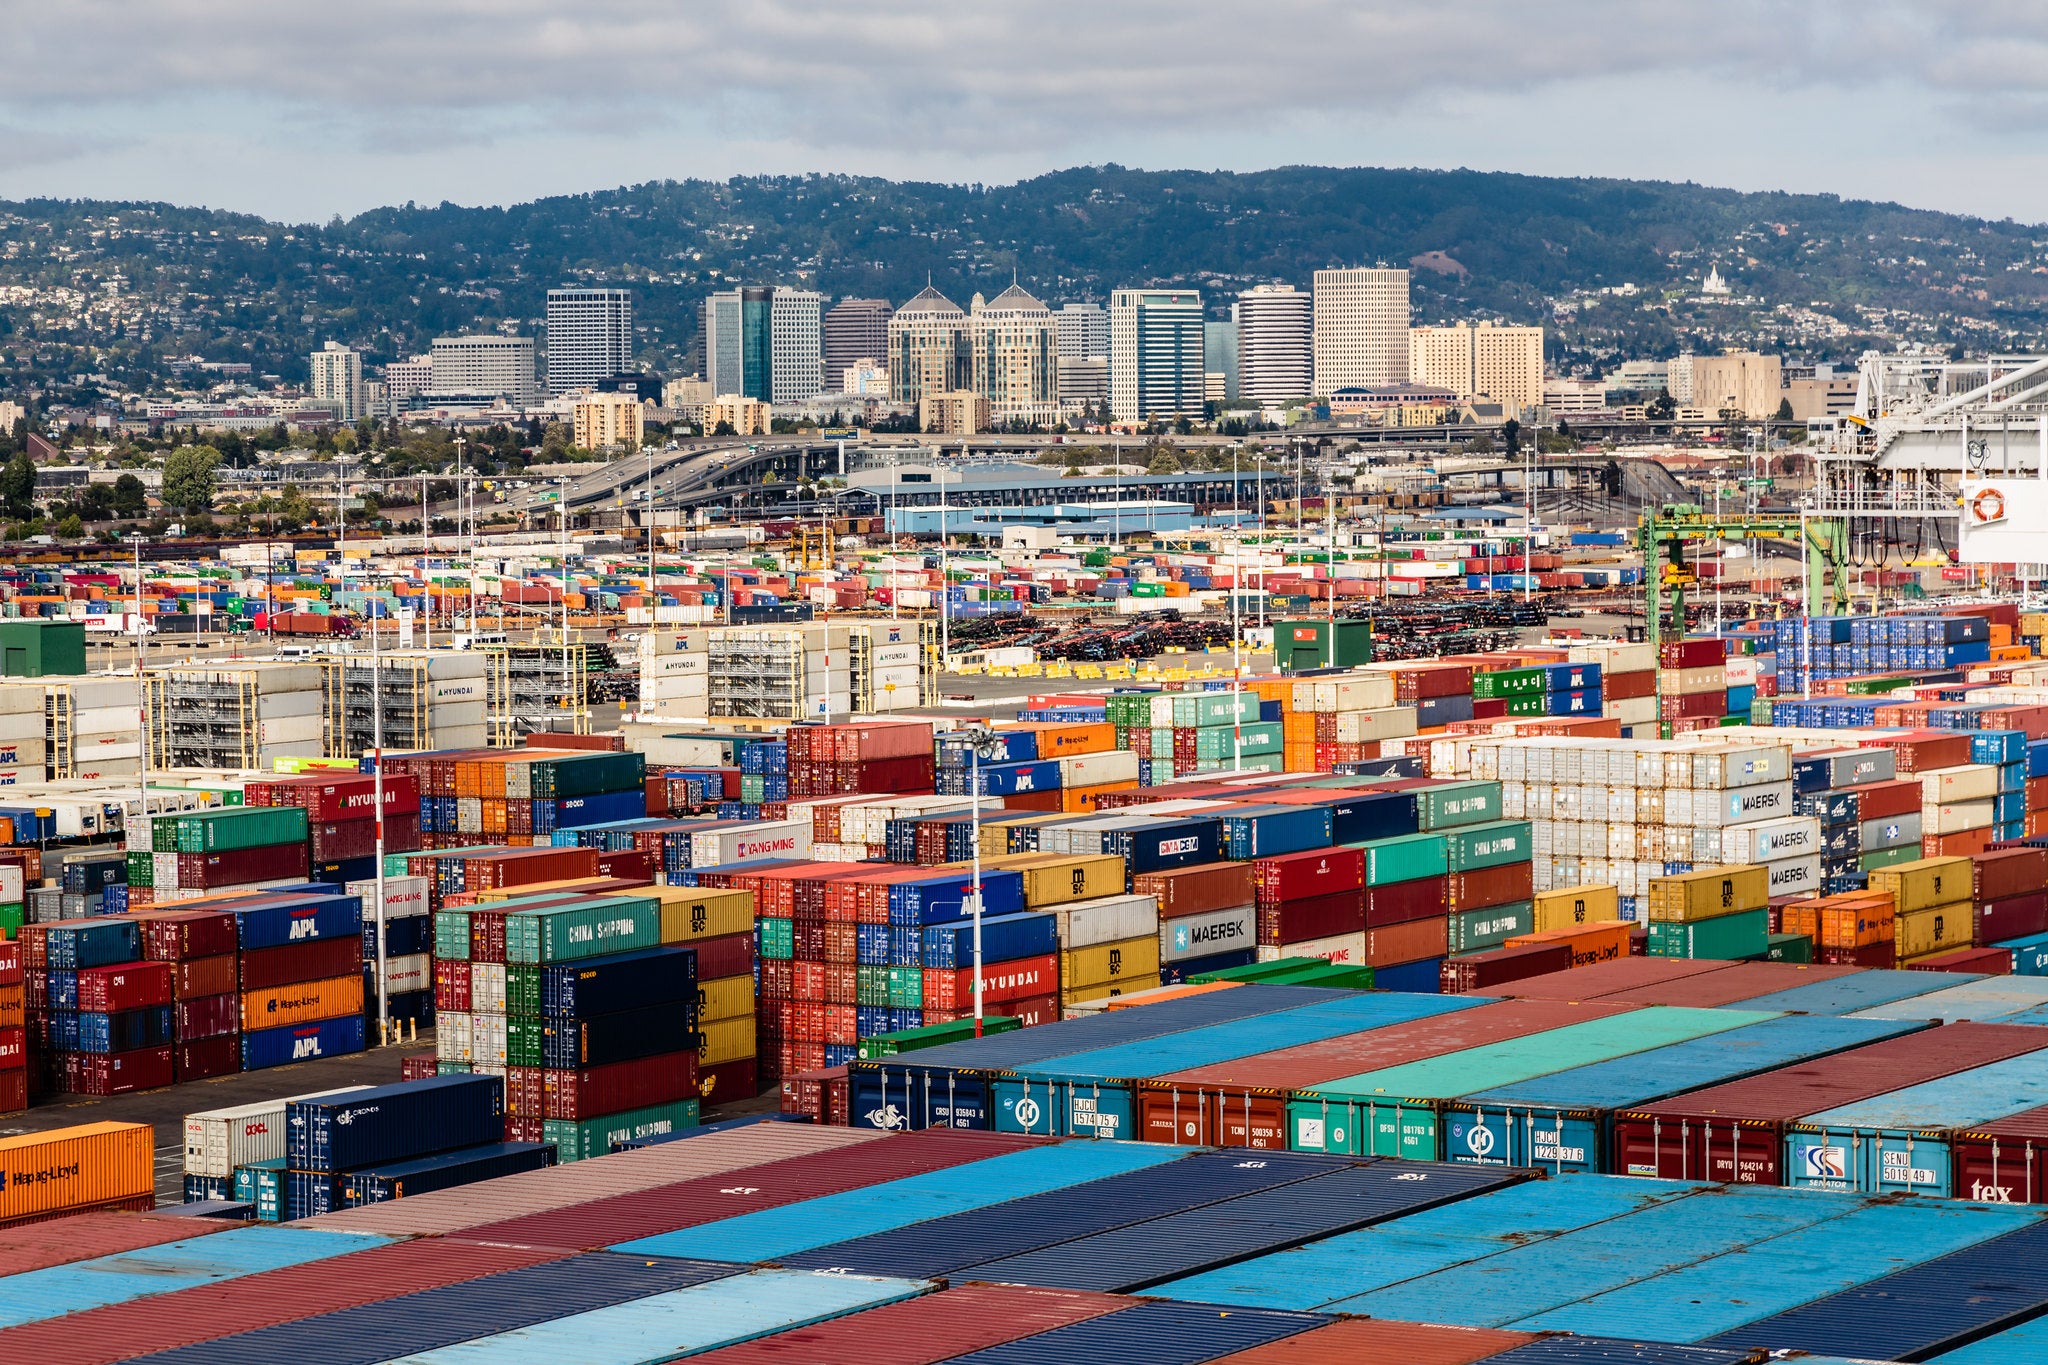 Shipping containers pile high at the Port of Oakland.